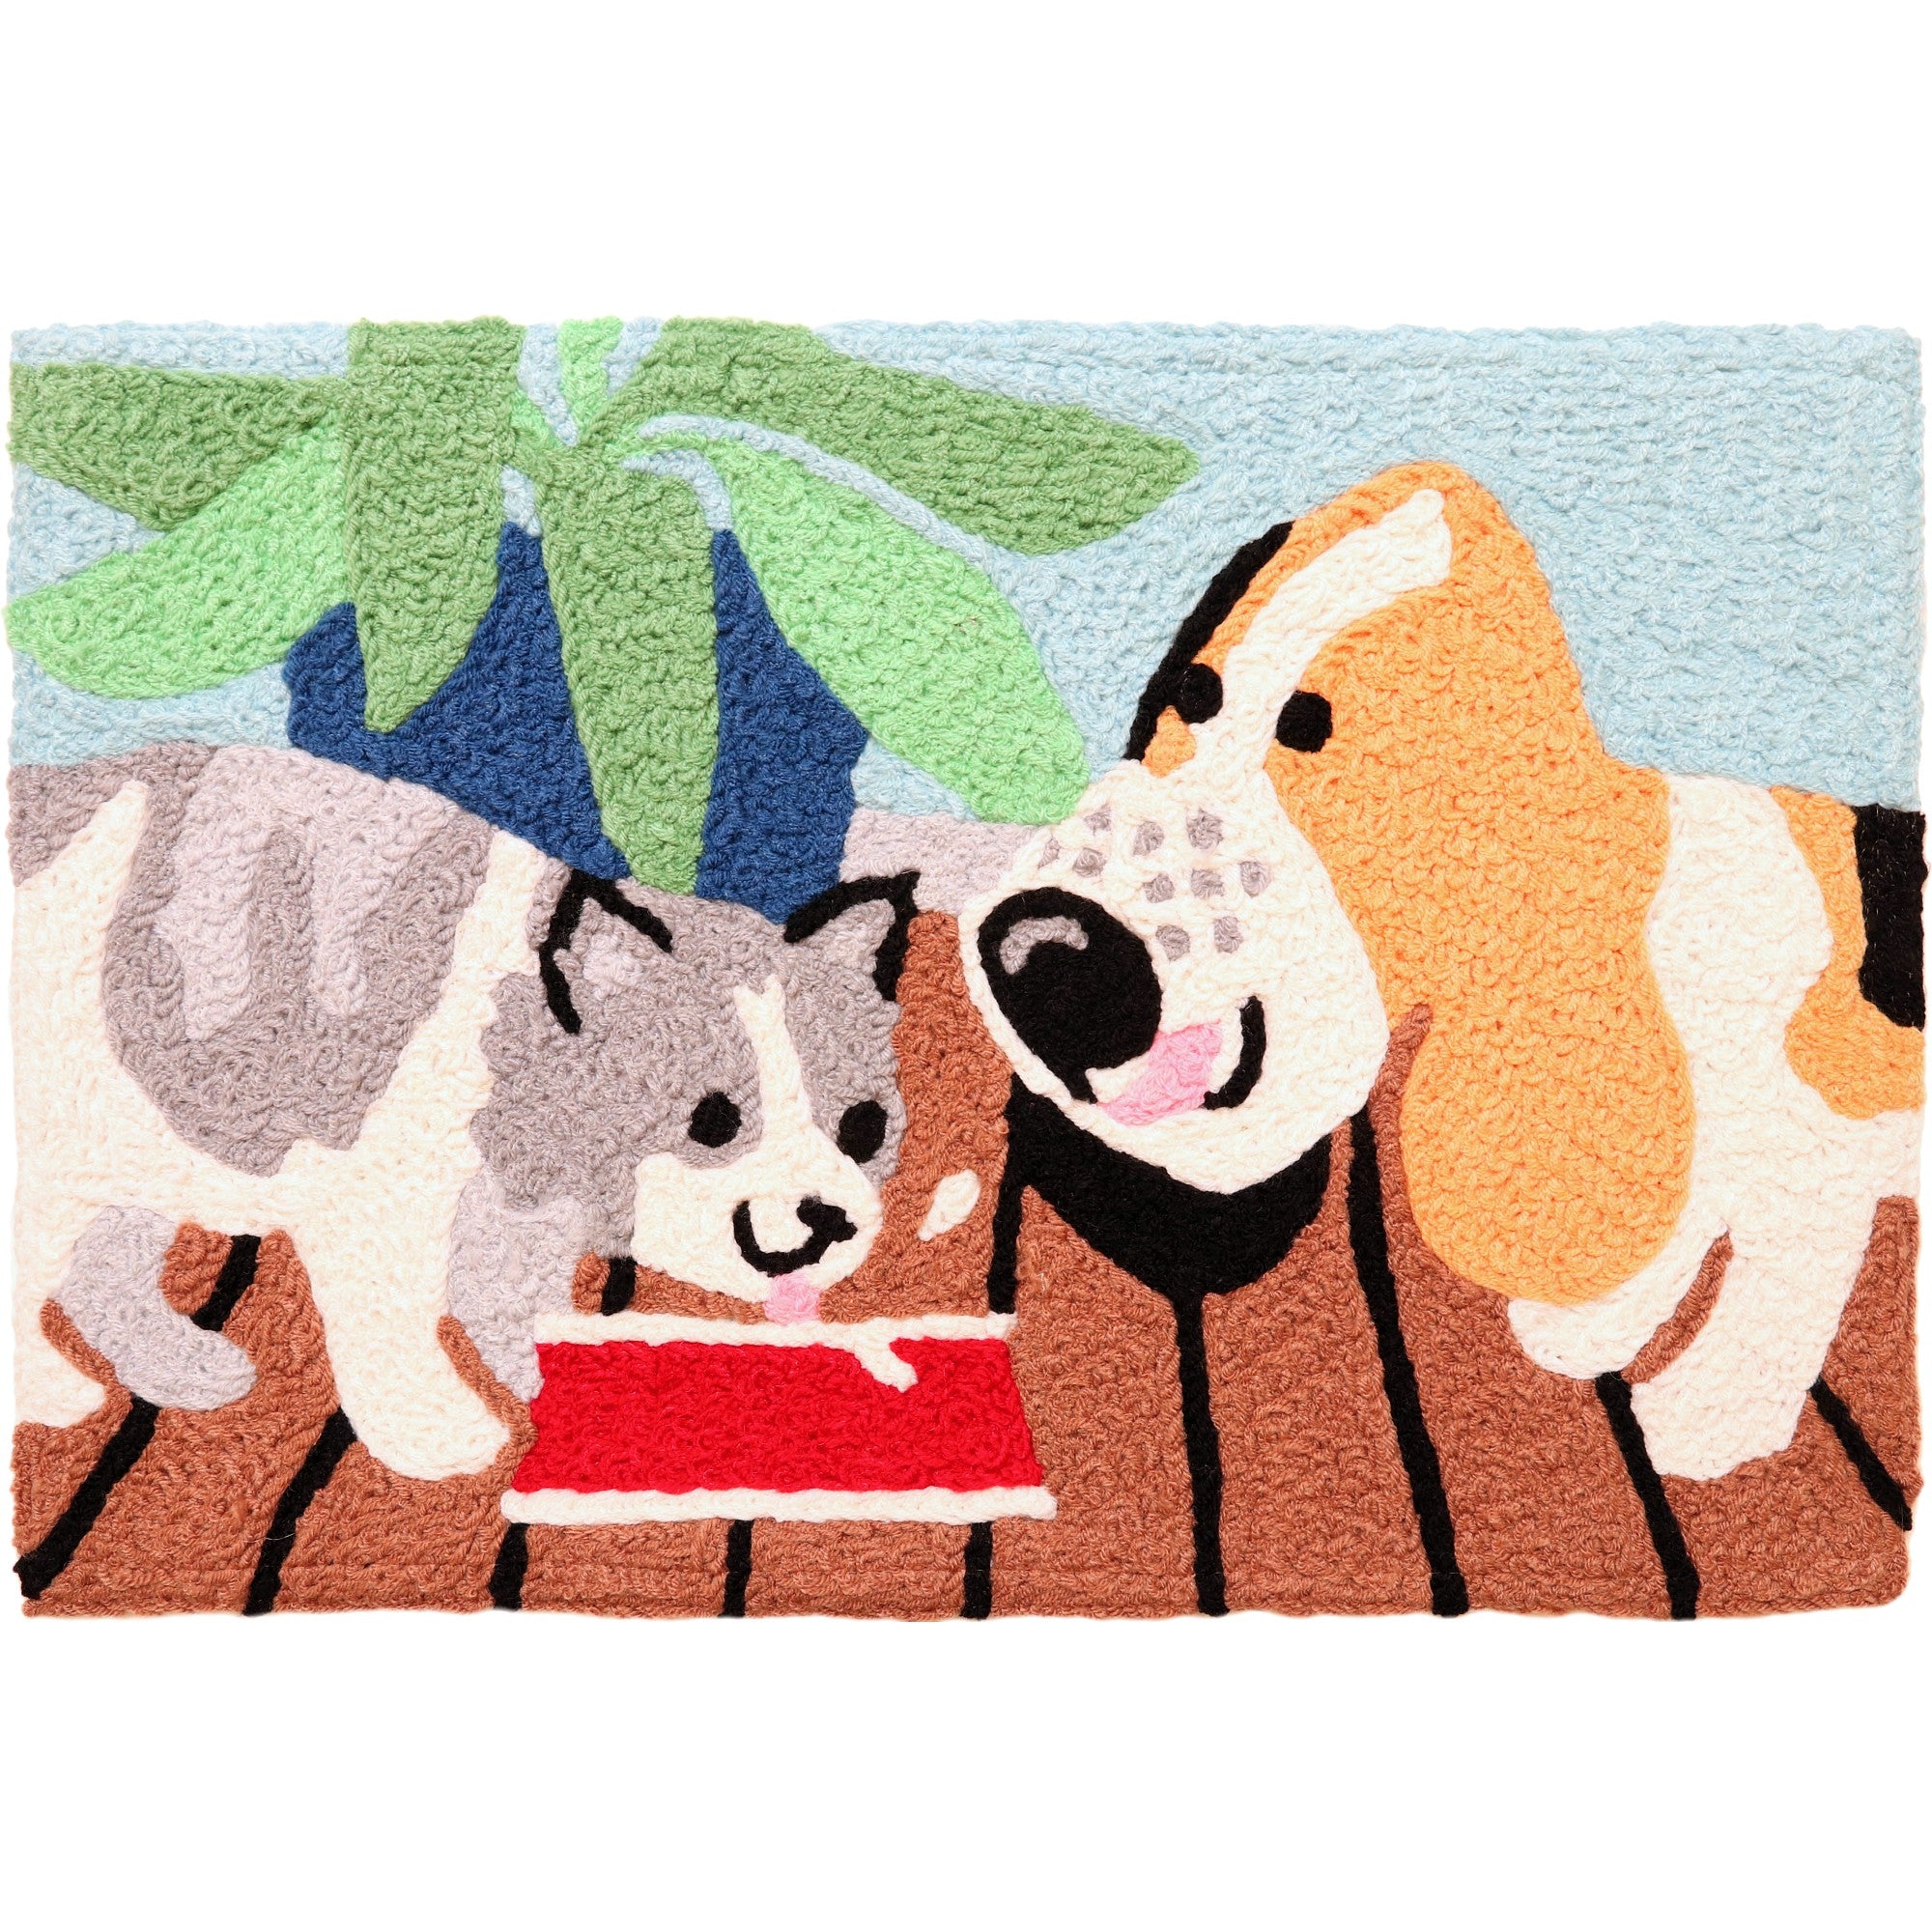 Jellybean Around The Water Bowl 20"x30" Washable Accent Rug